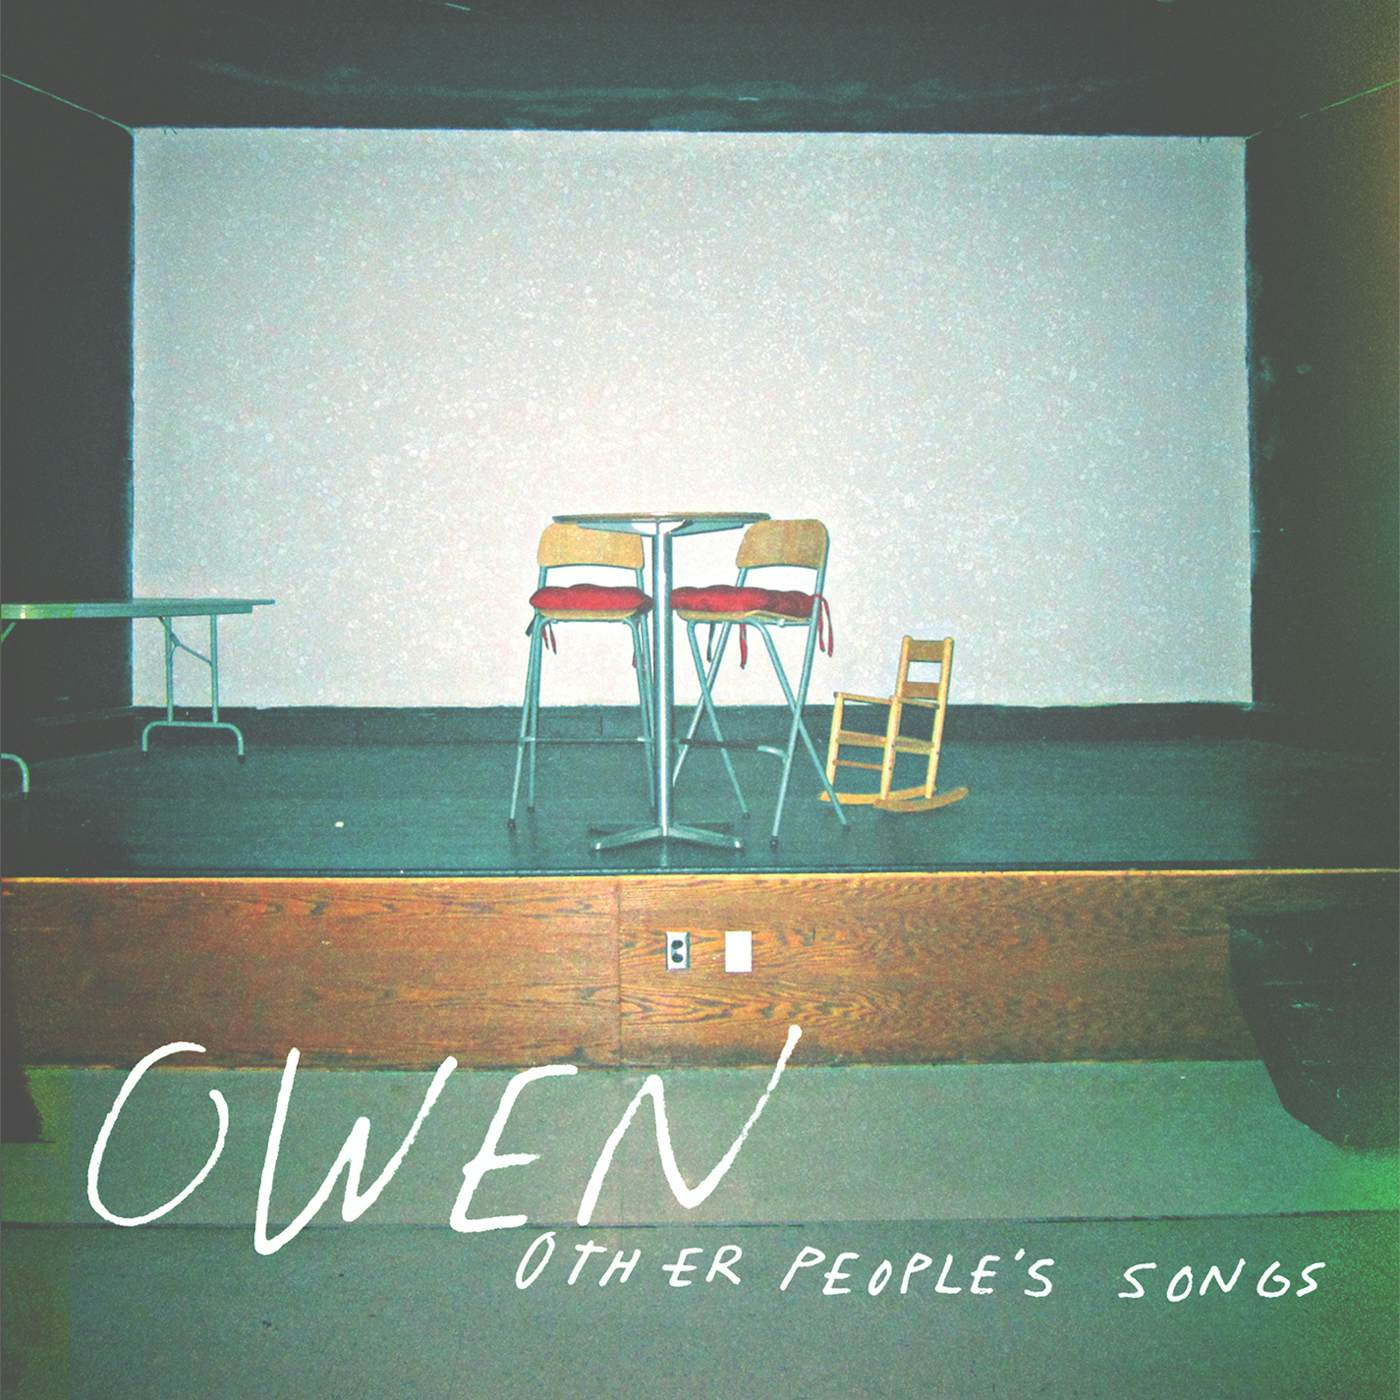 Owen OTHER PEOPLE'S SONGS CD